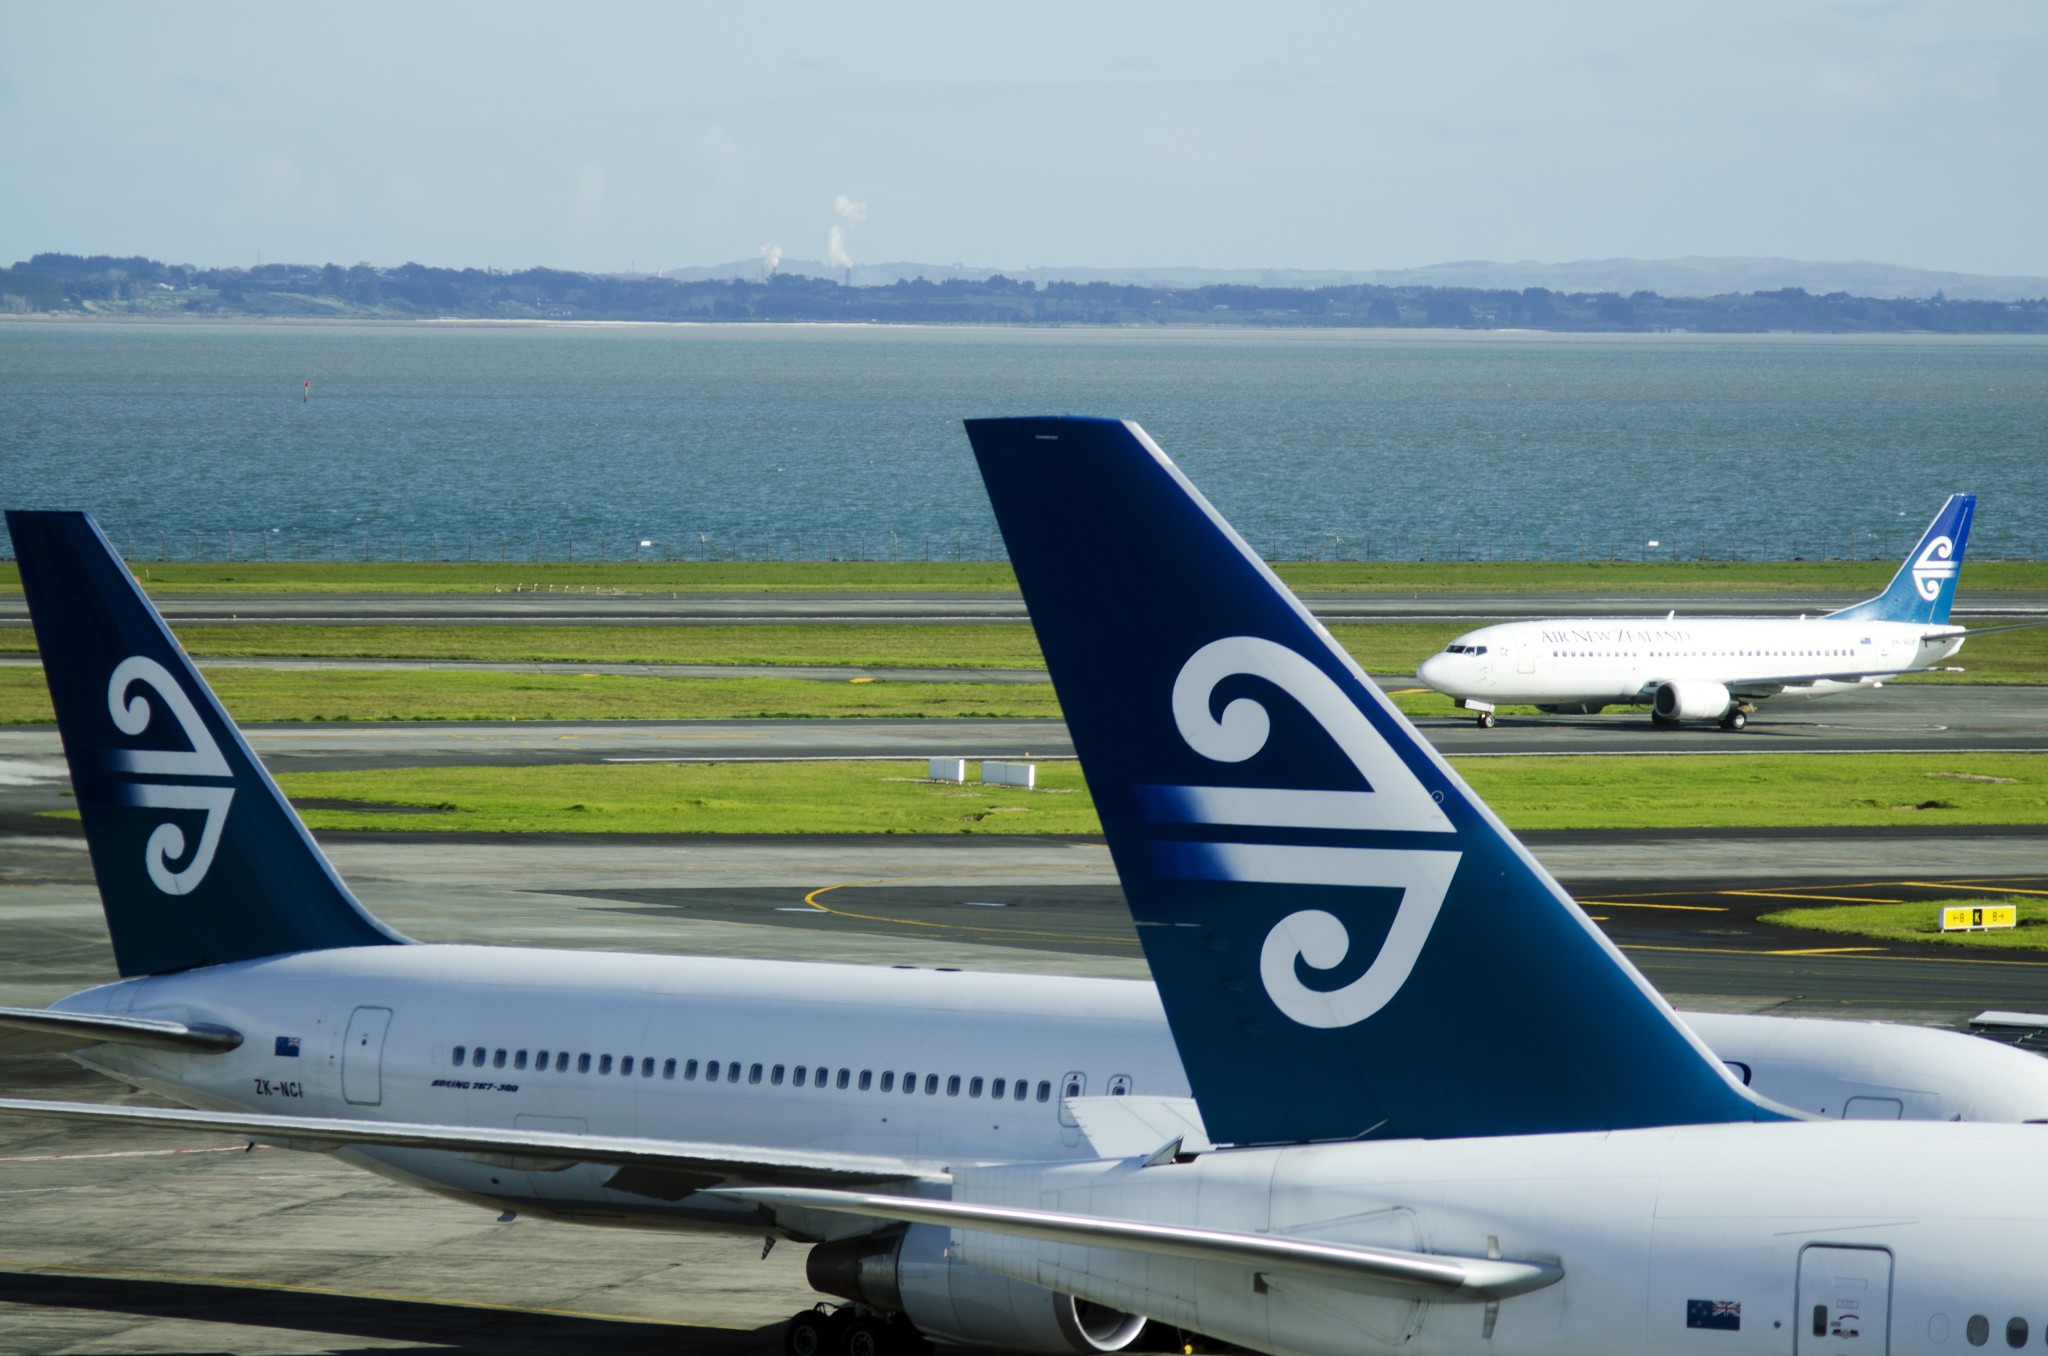 Air New Zealand brings back its fourth and last B777 from storage